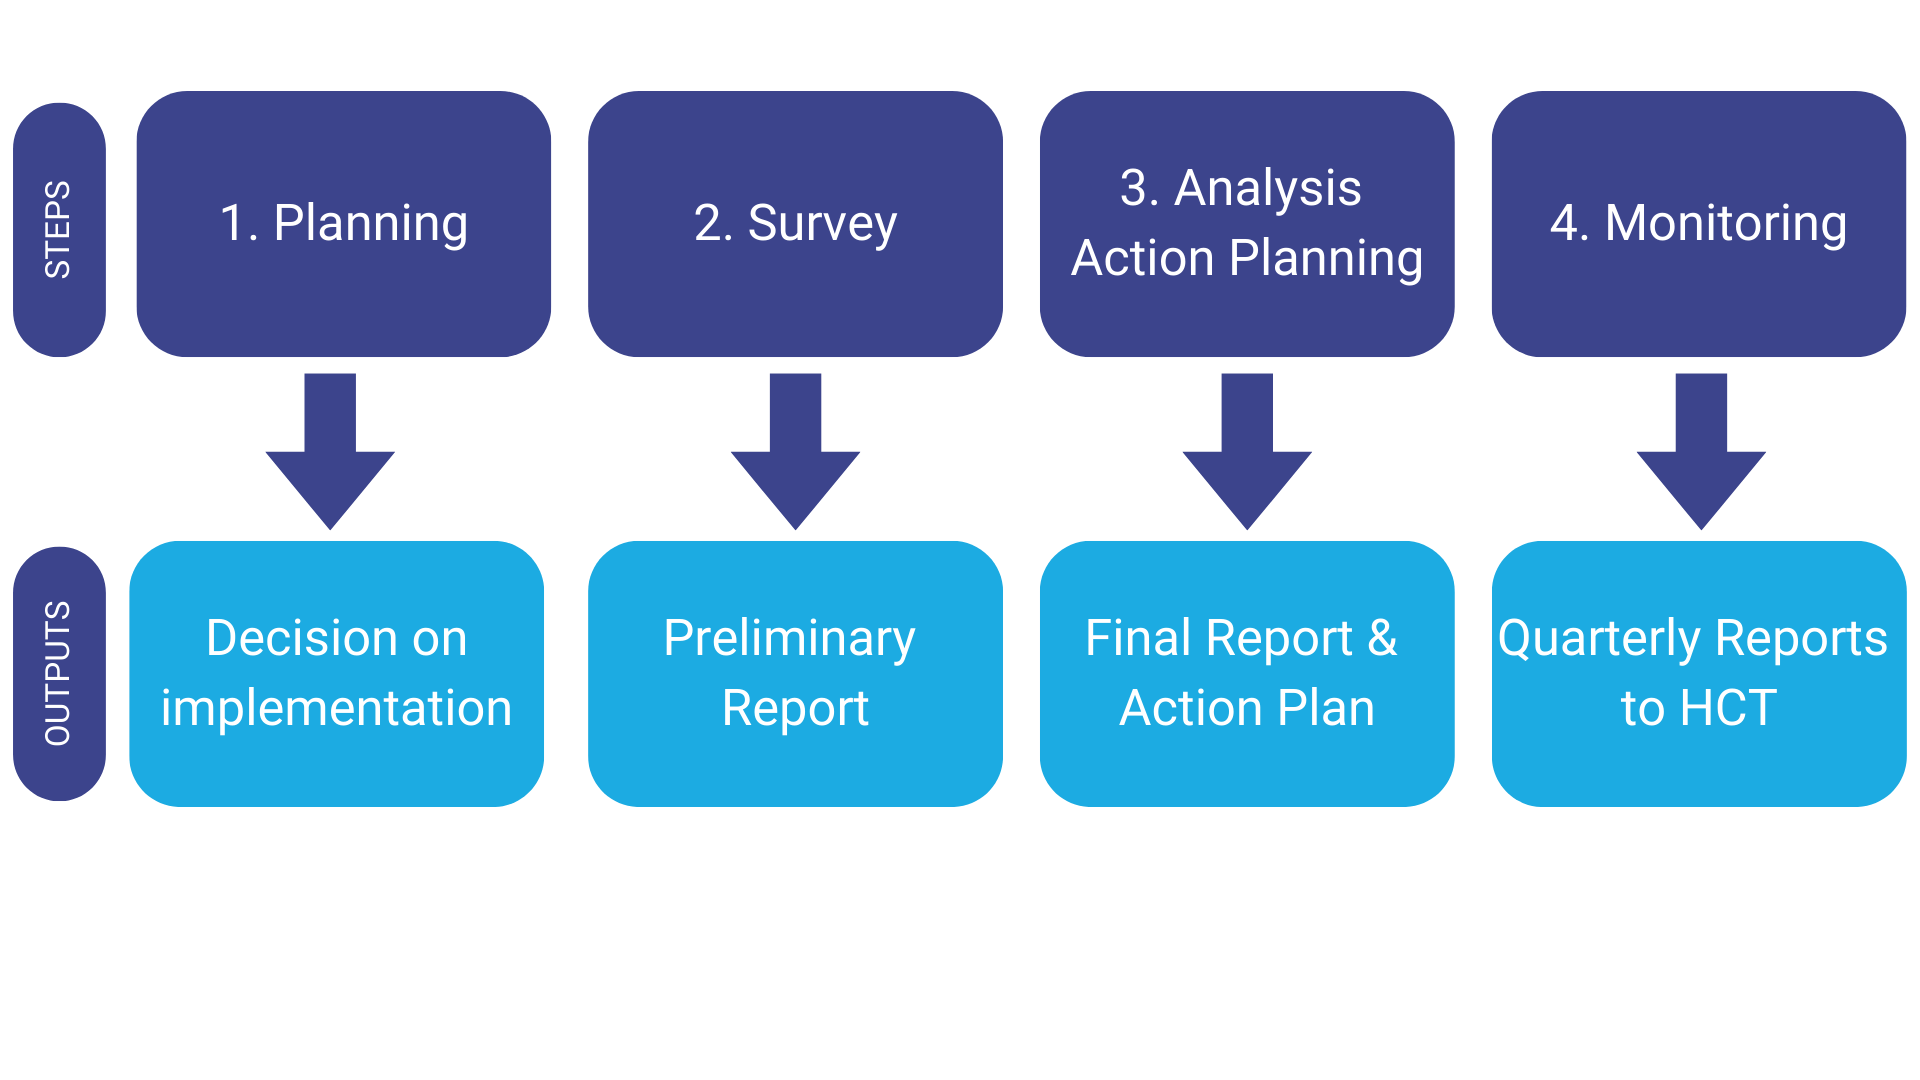 Steps: Planning, Survey, Analysis Action Planning, Monitoring. Outputs: Decision on implementation, preliminary report, final report & action plan, quarterly reports to HCT